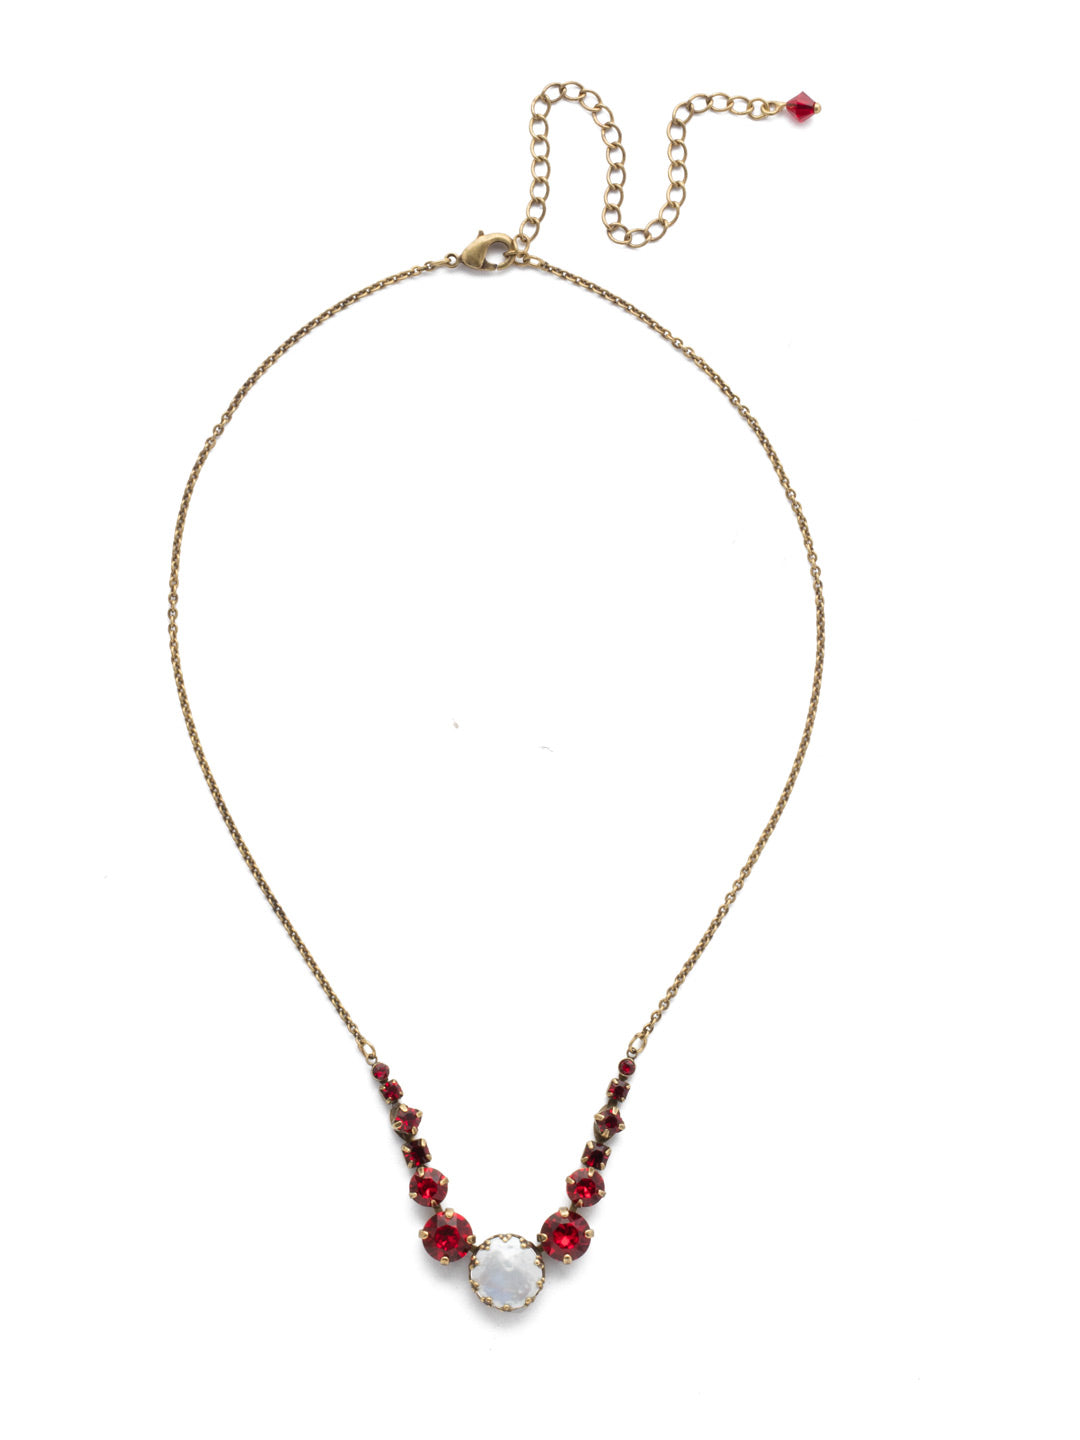 Meera Tennis Necklace - NEF43AGSNR - <p>This simple necklace combines one circular stone with several symmetrical stones on either side to add some sparkle to any look. From Sorrelli's Sansa Red collection in our Antique Gold-tone finish.</p>